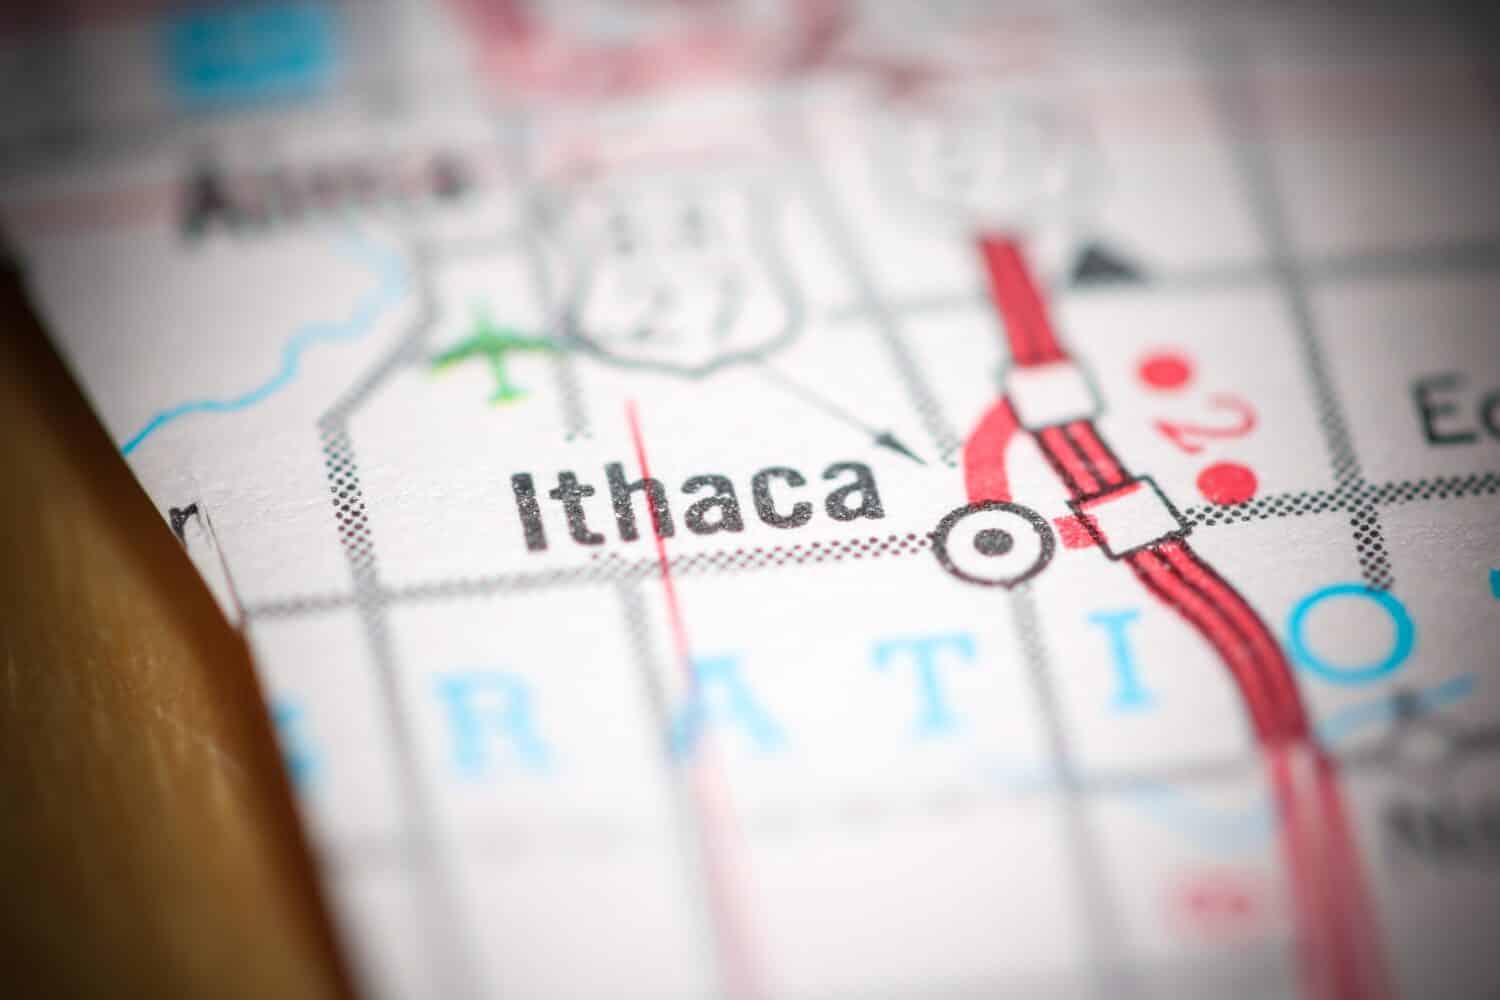 Ithaca. Michigan. USA on a geography map.